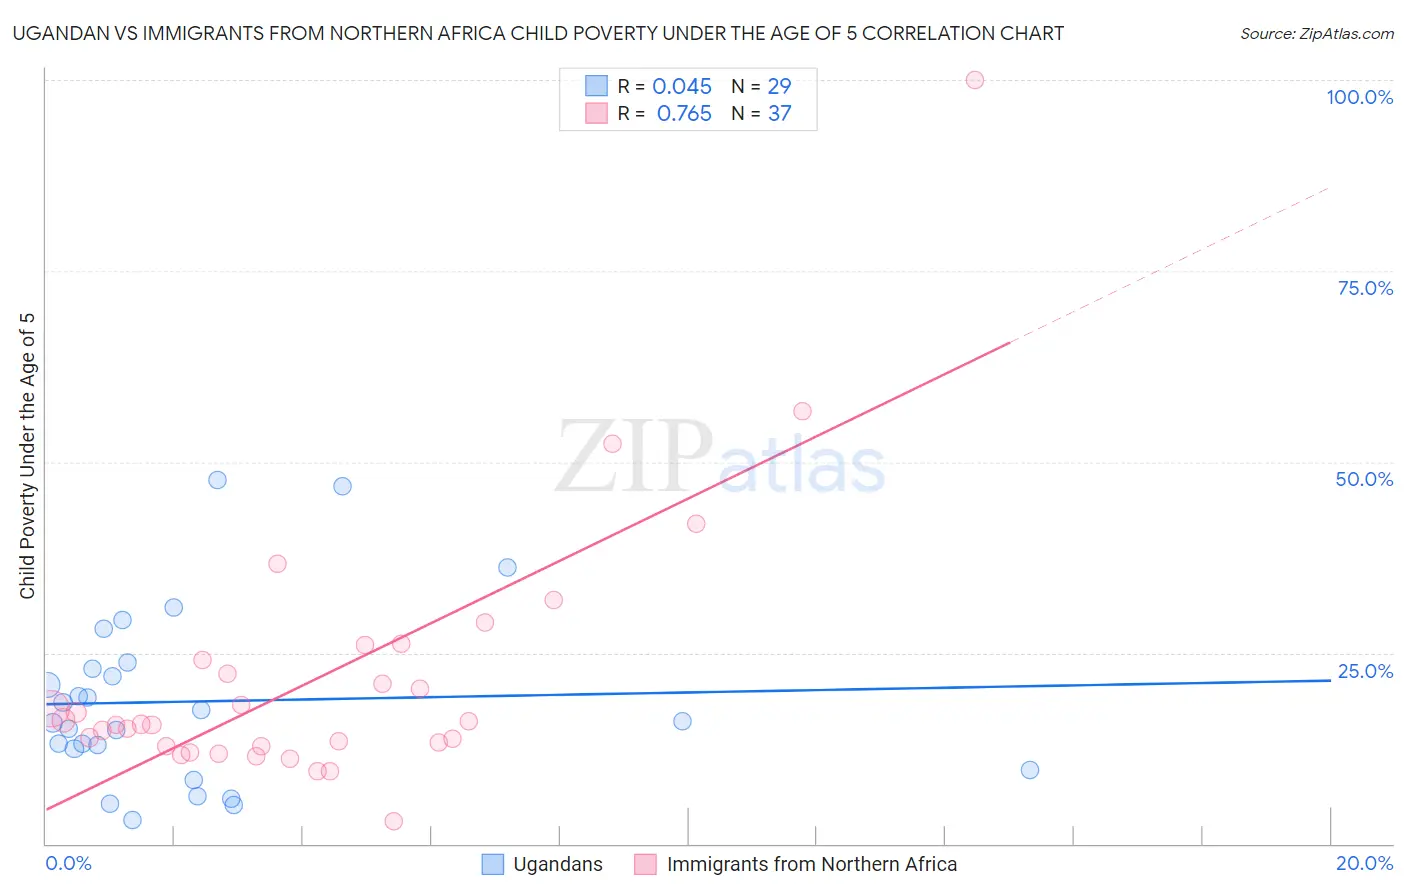 Ugandan vs Immigrants from Northern Africa Child Poverty Under the Age of 5